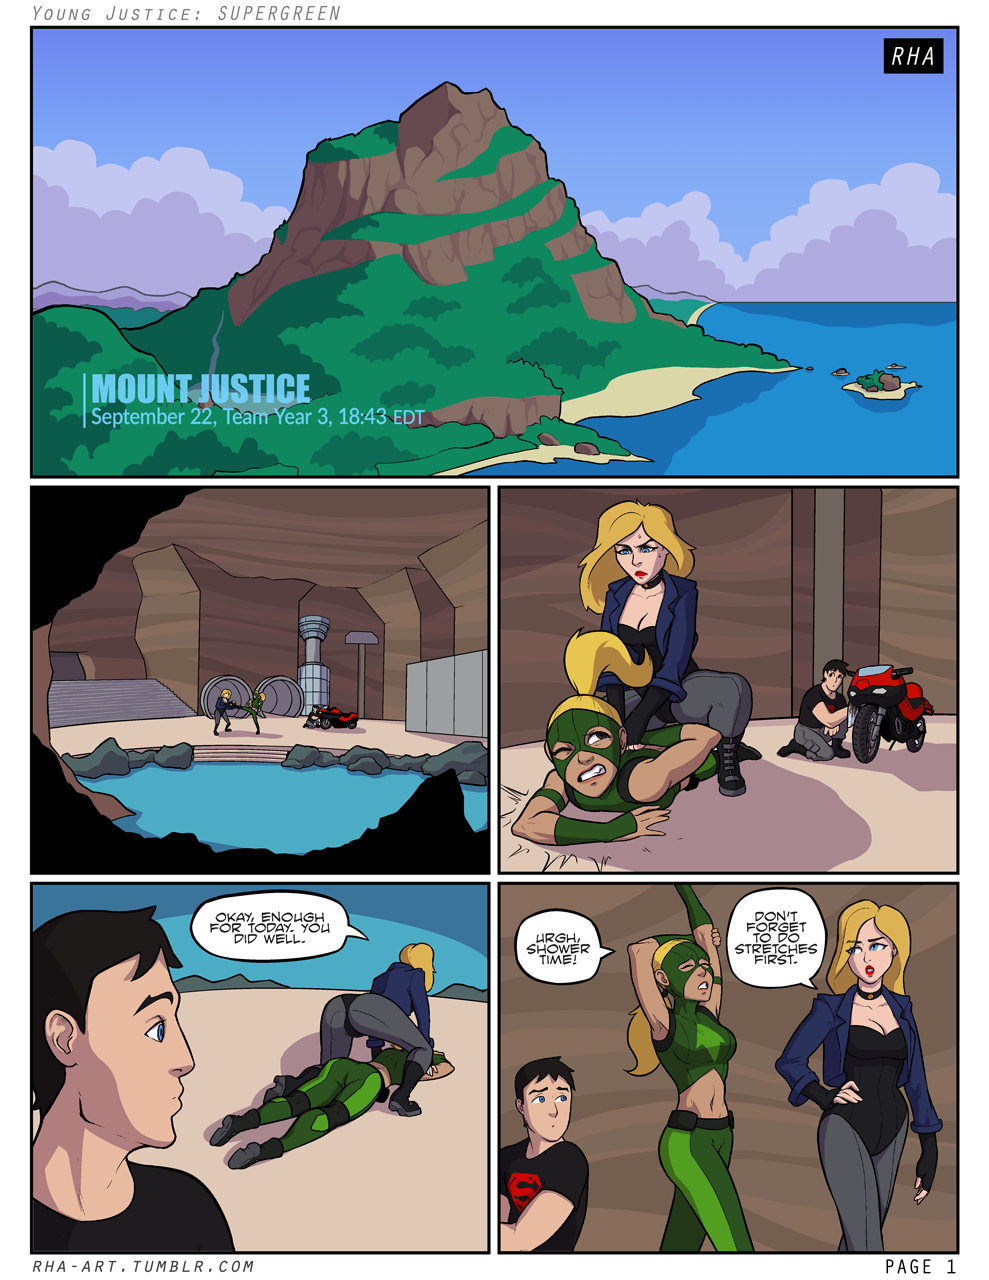 rha_382701_Young_Justice_Supergreen_Page_01.png